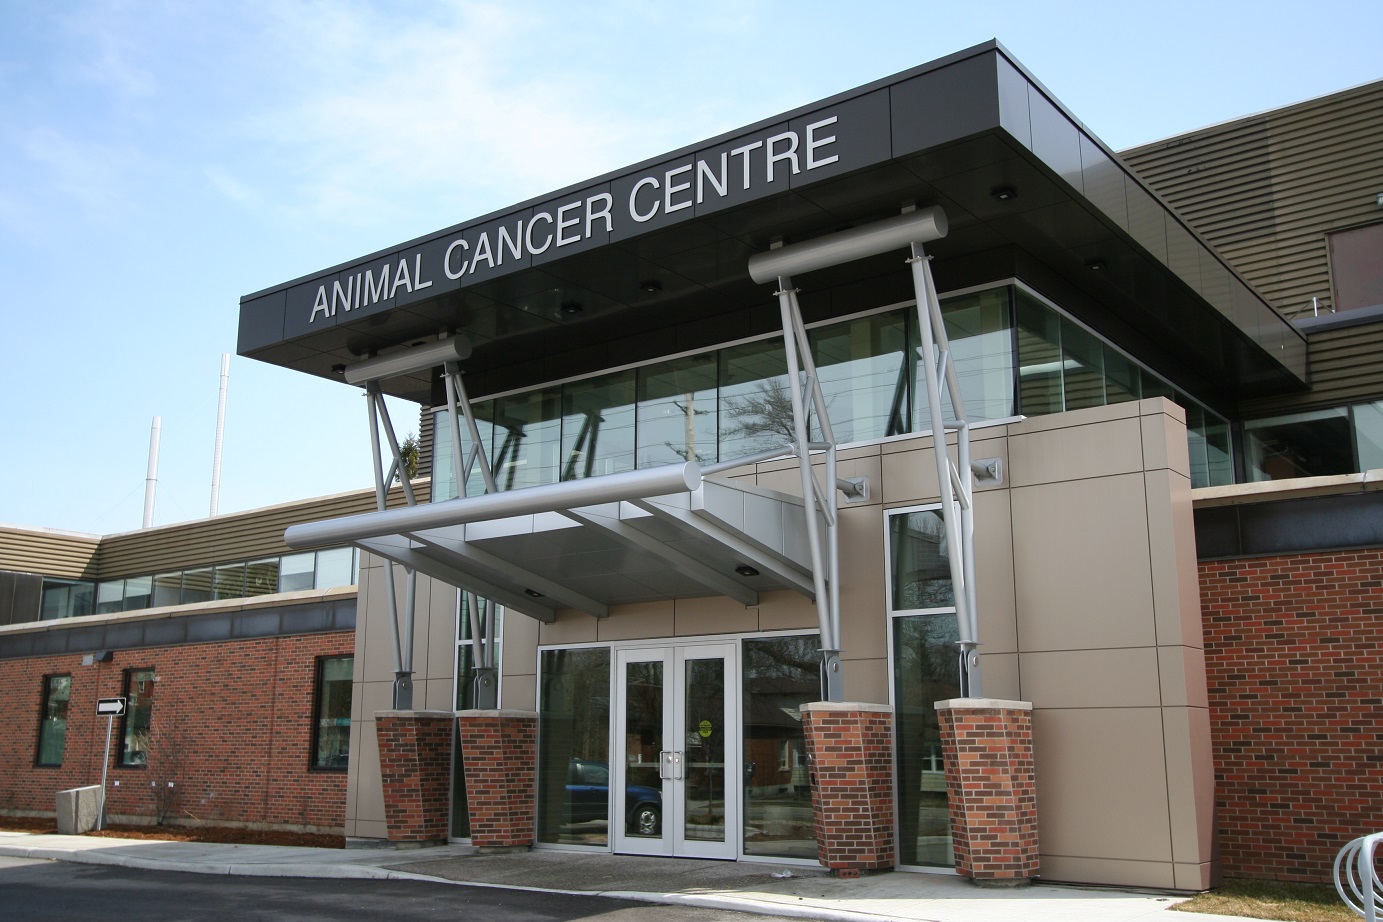 University of Guelph Animal Cancer Centre